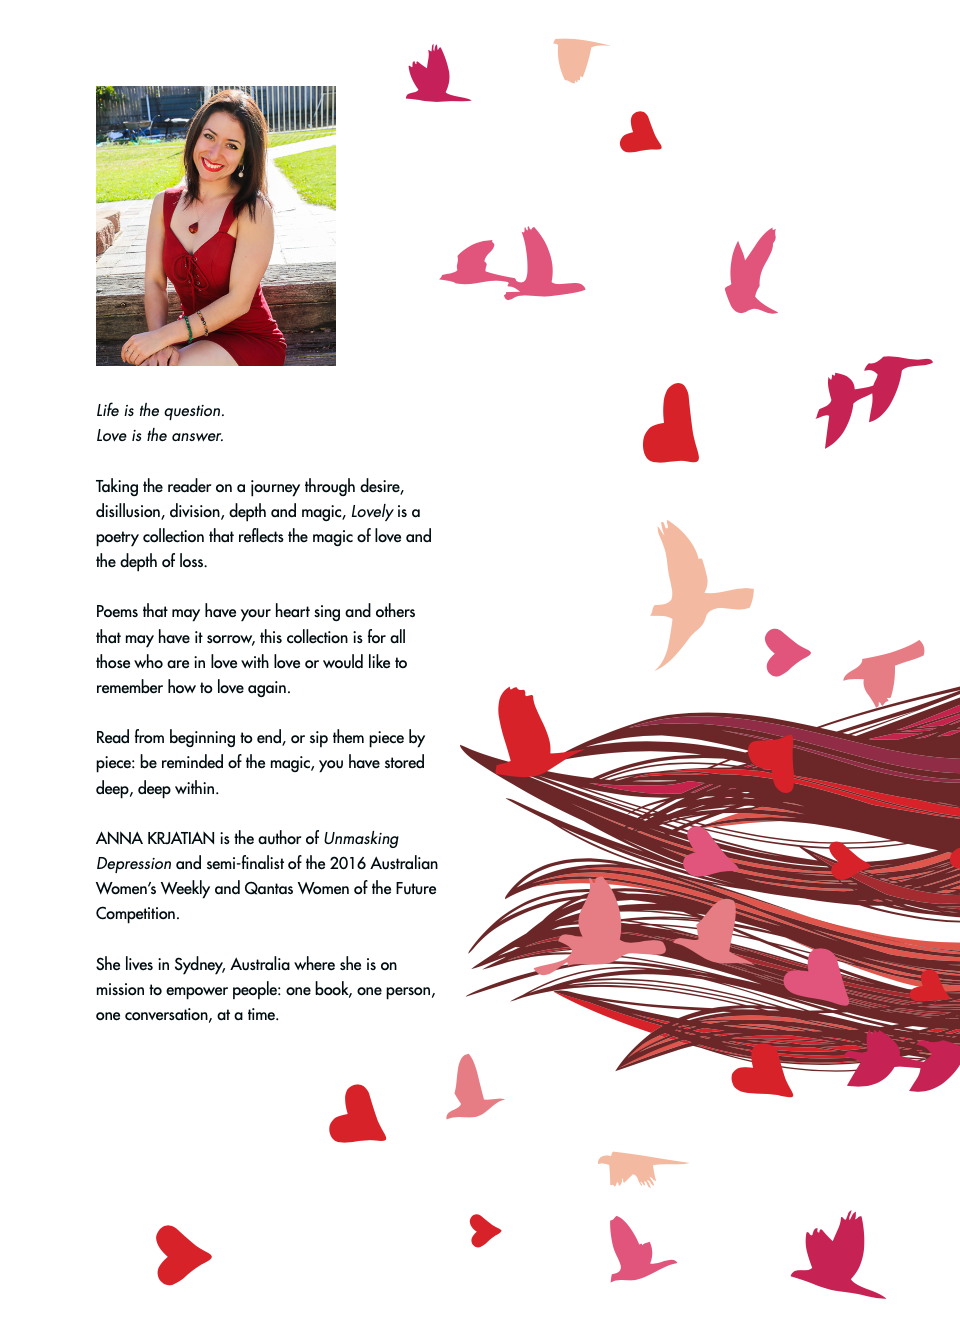 The back book cover for "Lovely - Poetry on Love and Loss" with the end of the girl's hair blowing across the page and the hearts and birds flying towards the book blurb and Anna's headshot as she sits smiling at the camera, wearing a red dress.